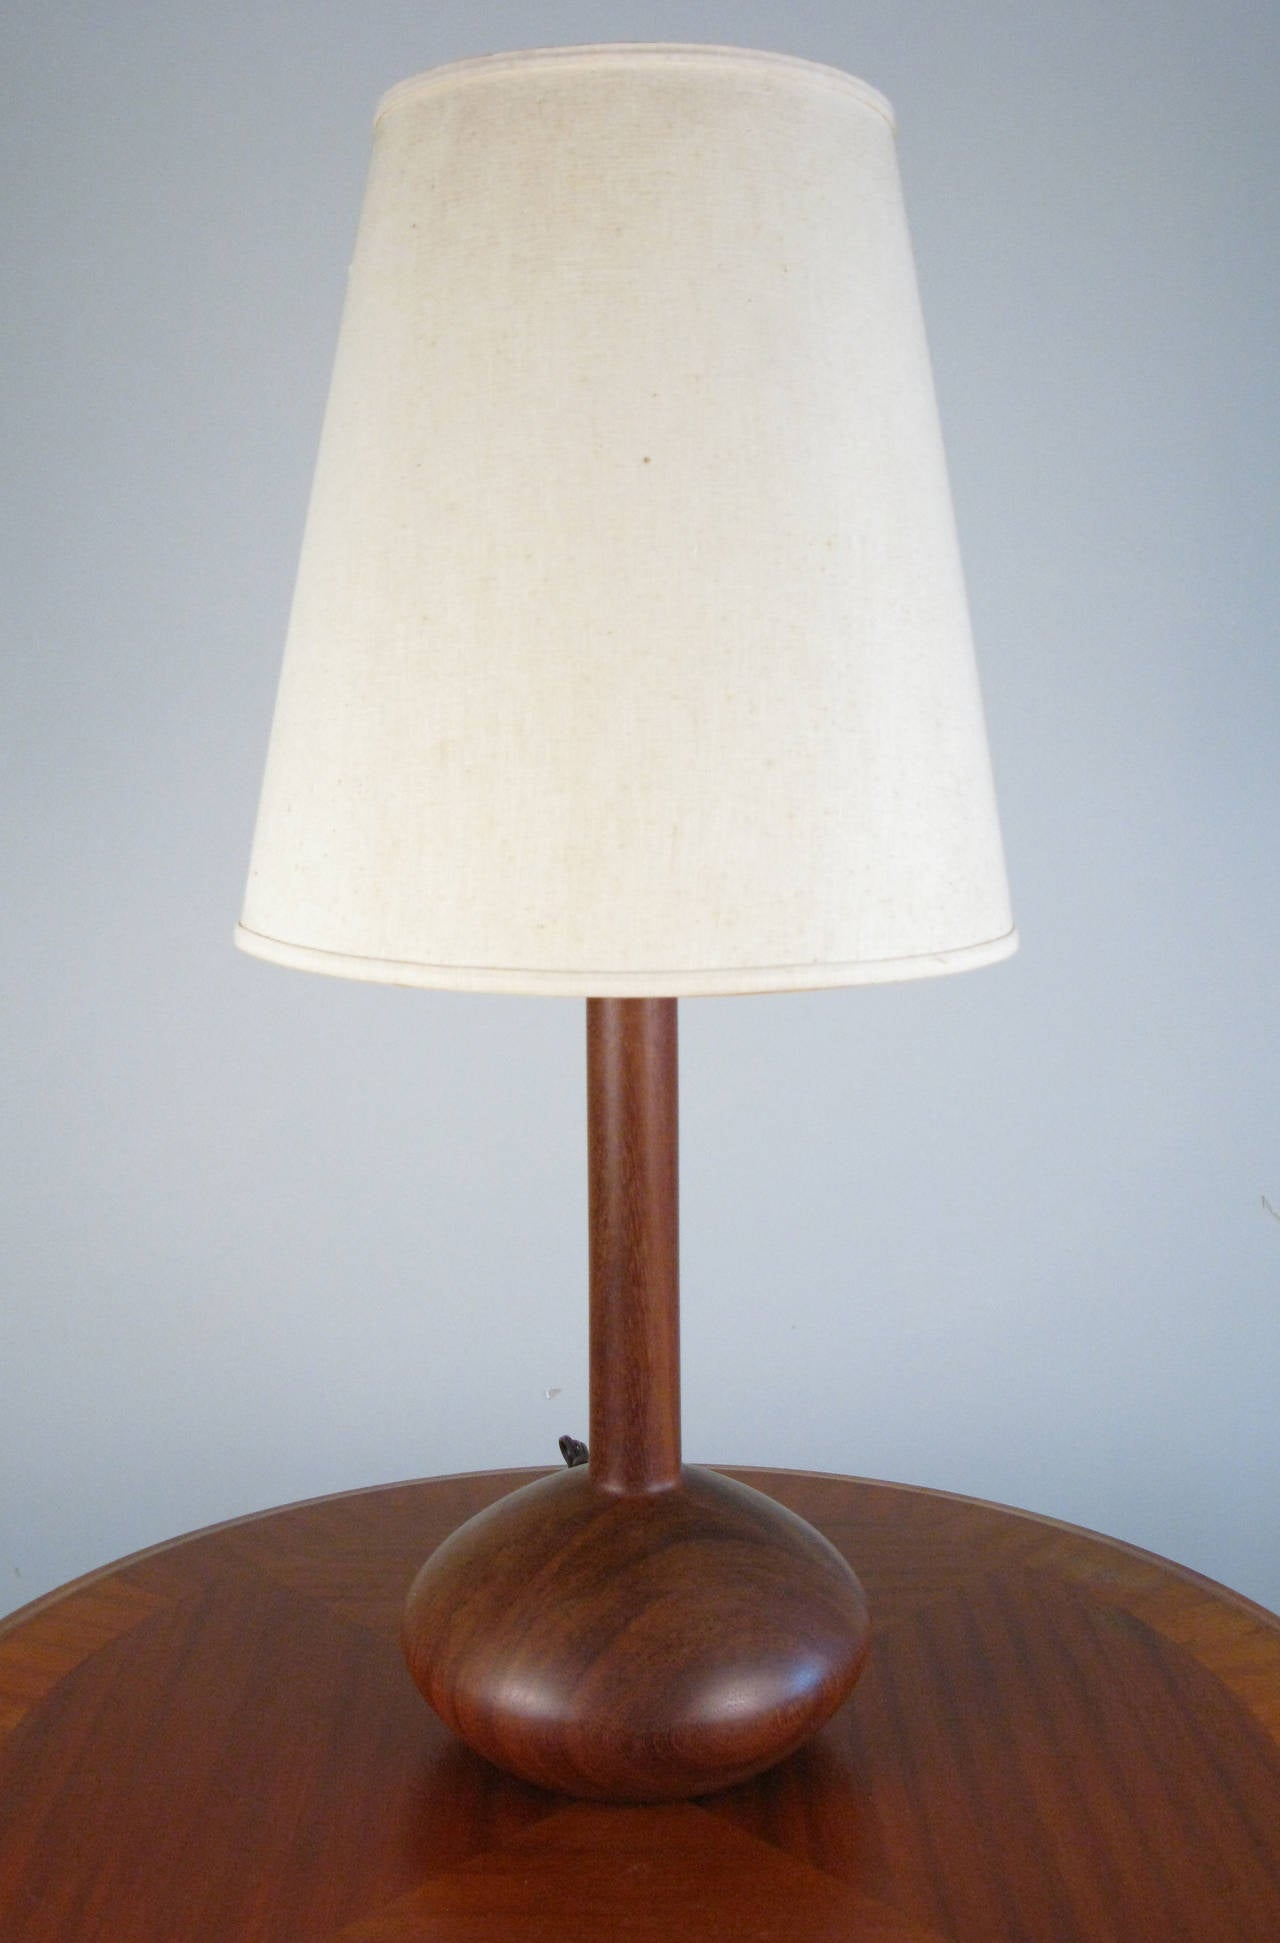 A simple and elegant mid-century table lamp with its original shade.